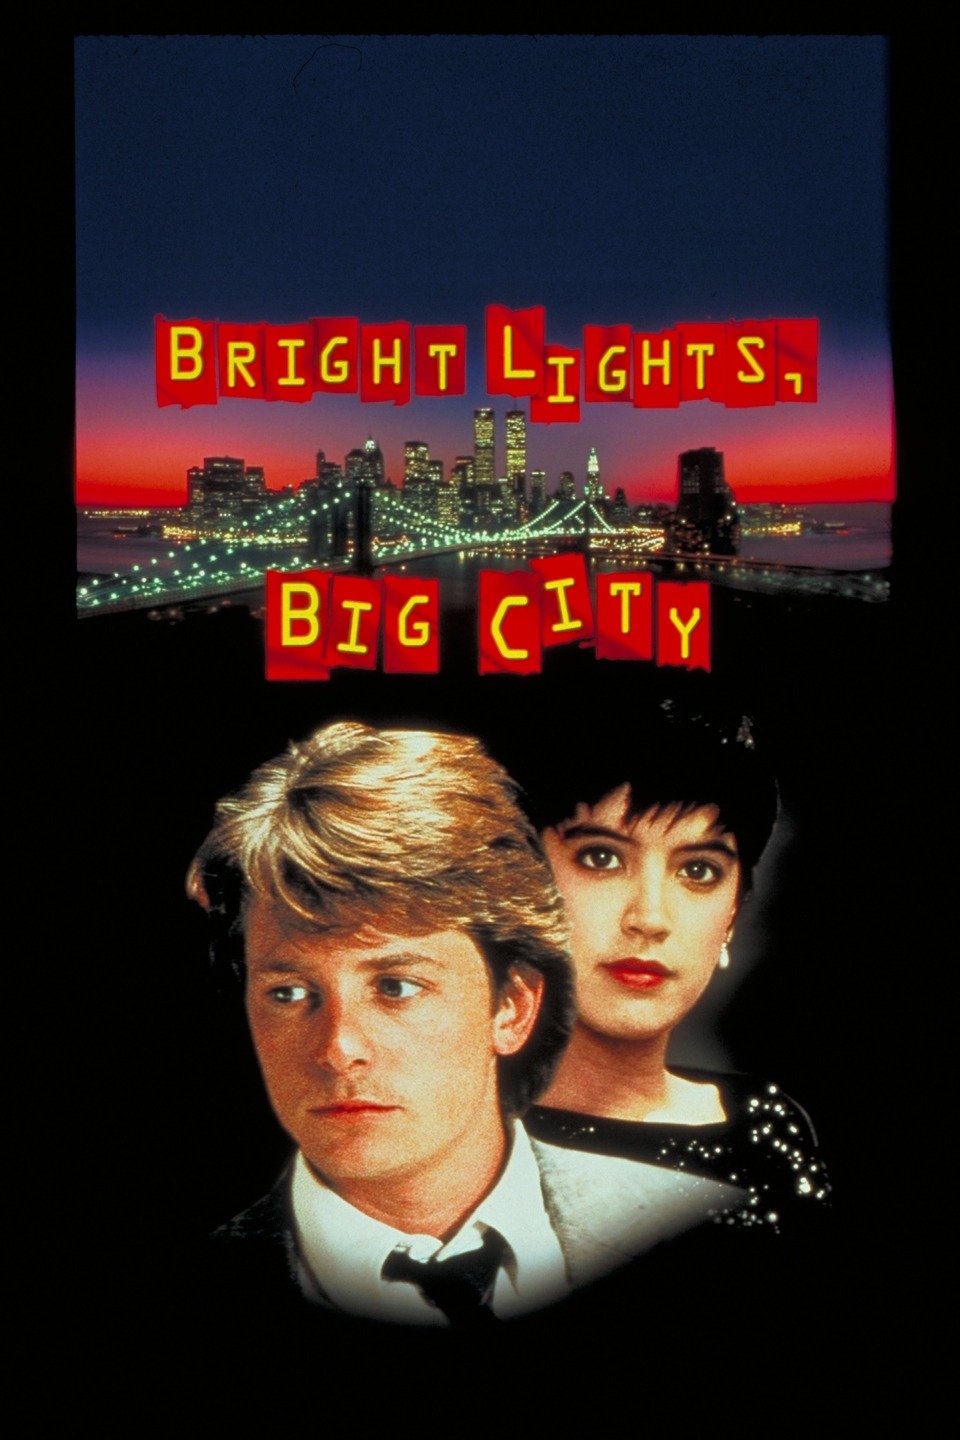 Bright Lights, City: Trailer 1 Trailers & Videos - Rotten Tomatoes